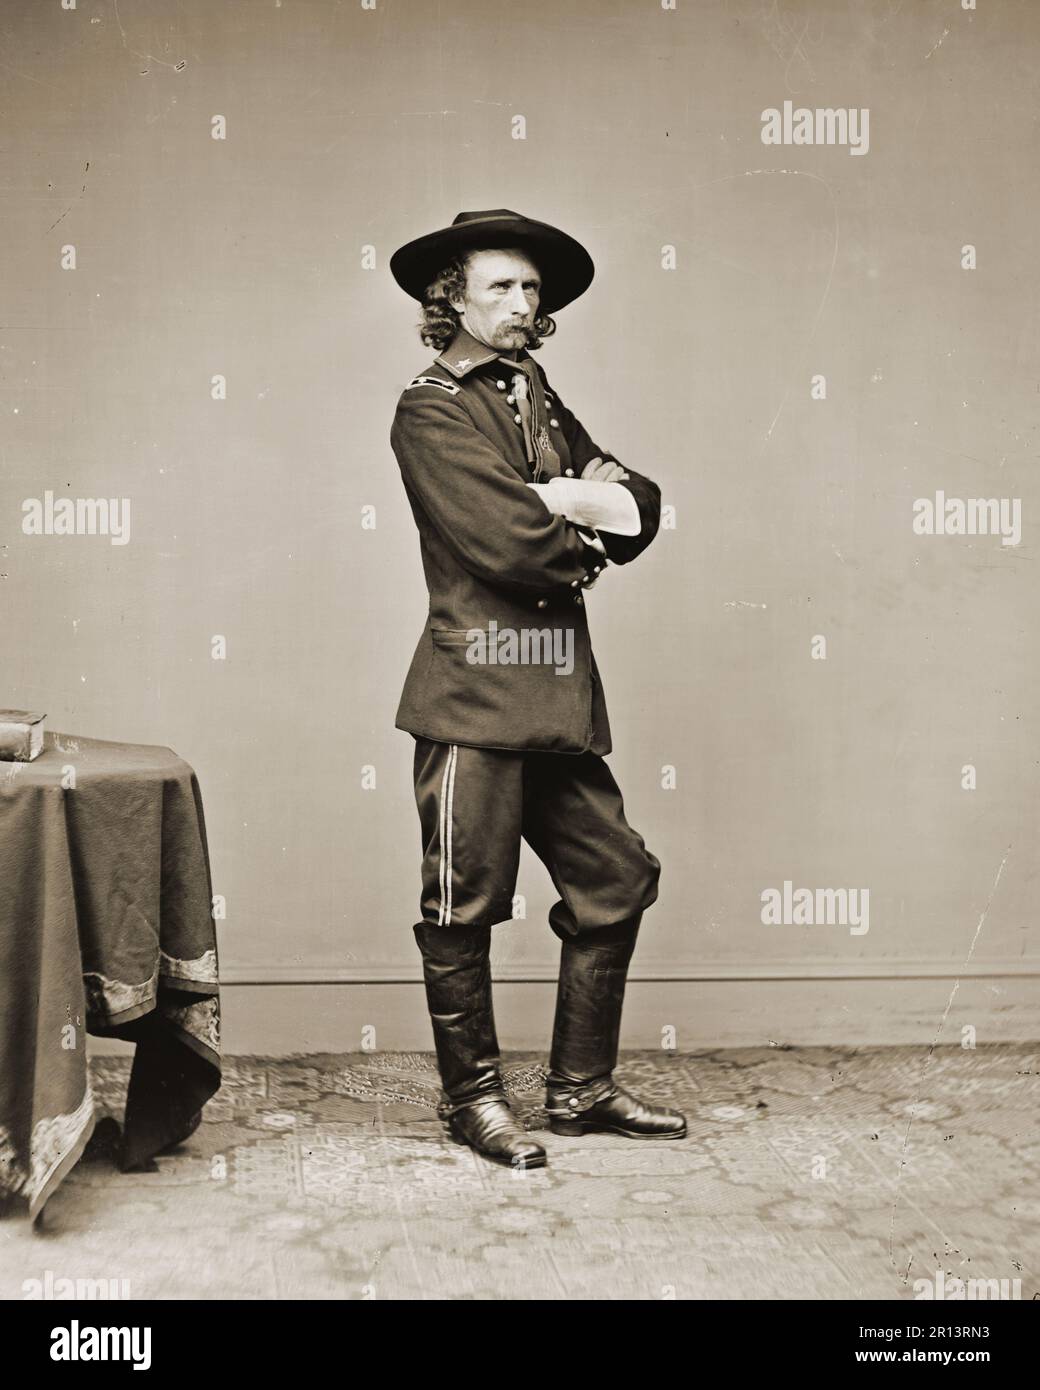 General George Custer, U.S. Army -Full length standing.Annotation from negative, scratched on emulsion: Genl. Custer, 510, 13239; in pencil: Gen. Custer. Photographed between 1860 and 1865. Stock Photo